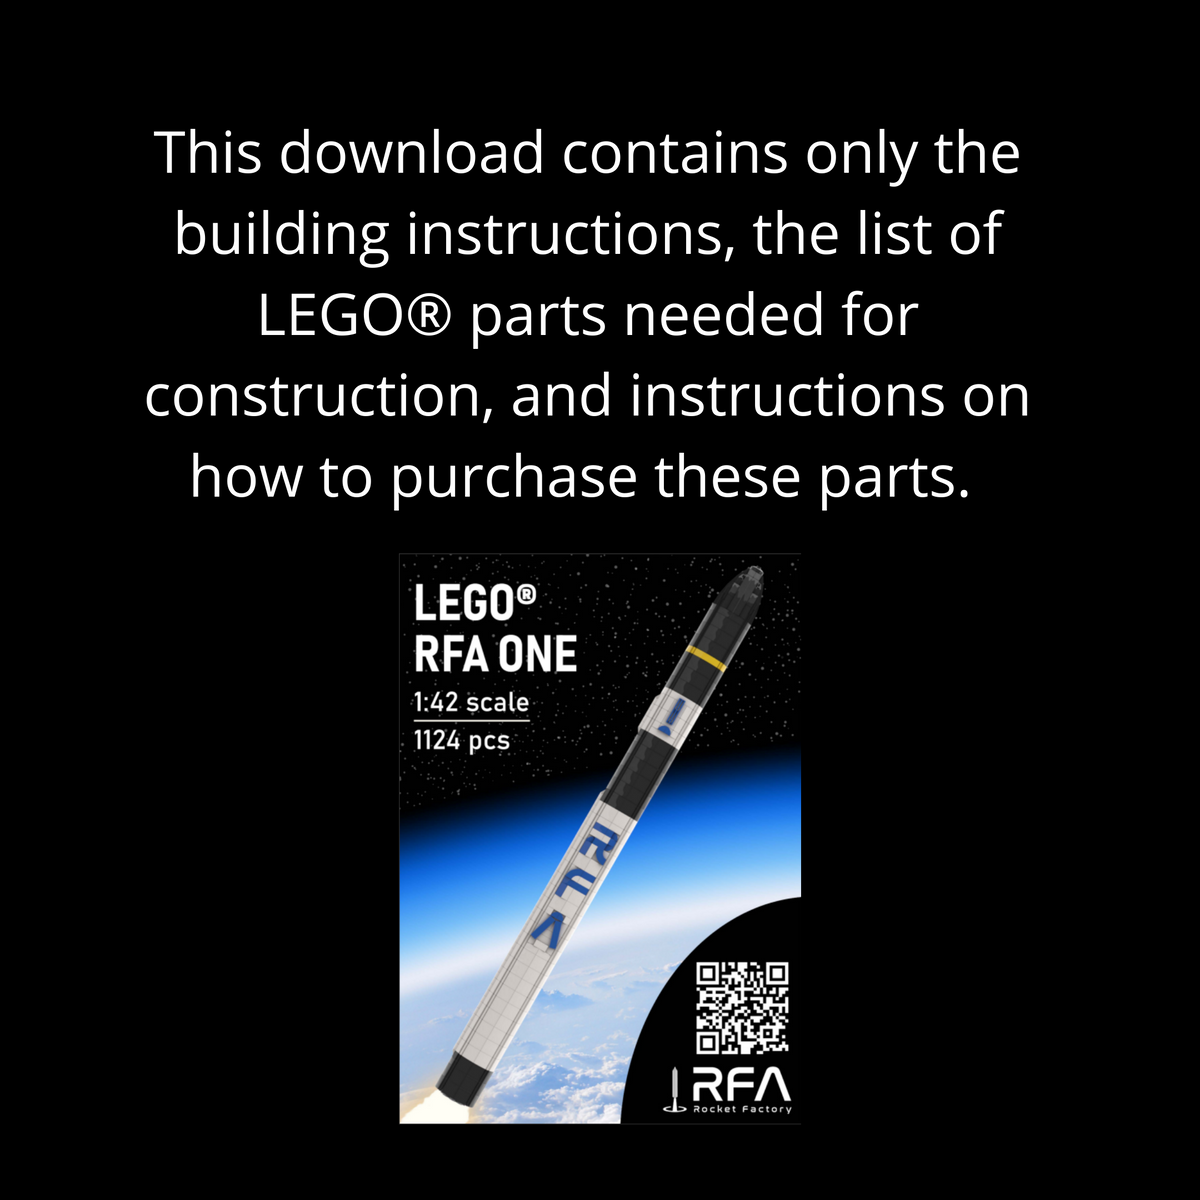 RFA - Building instructions RFA ONE model [1:42] out of LEGO® bricks